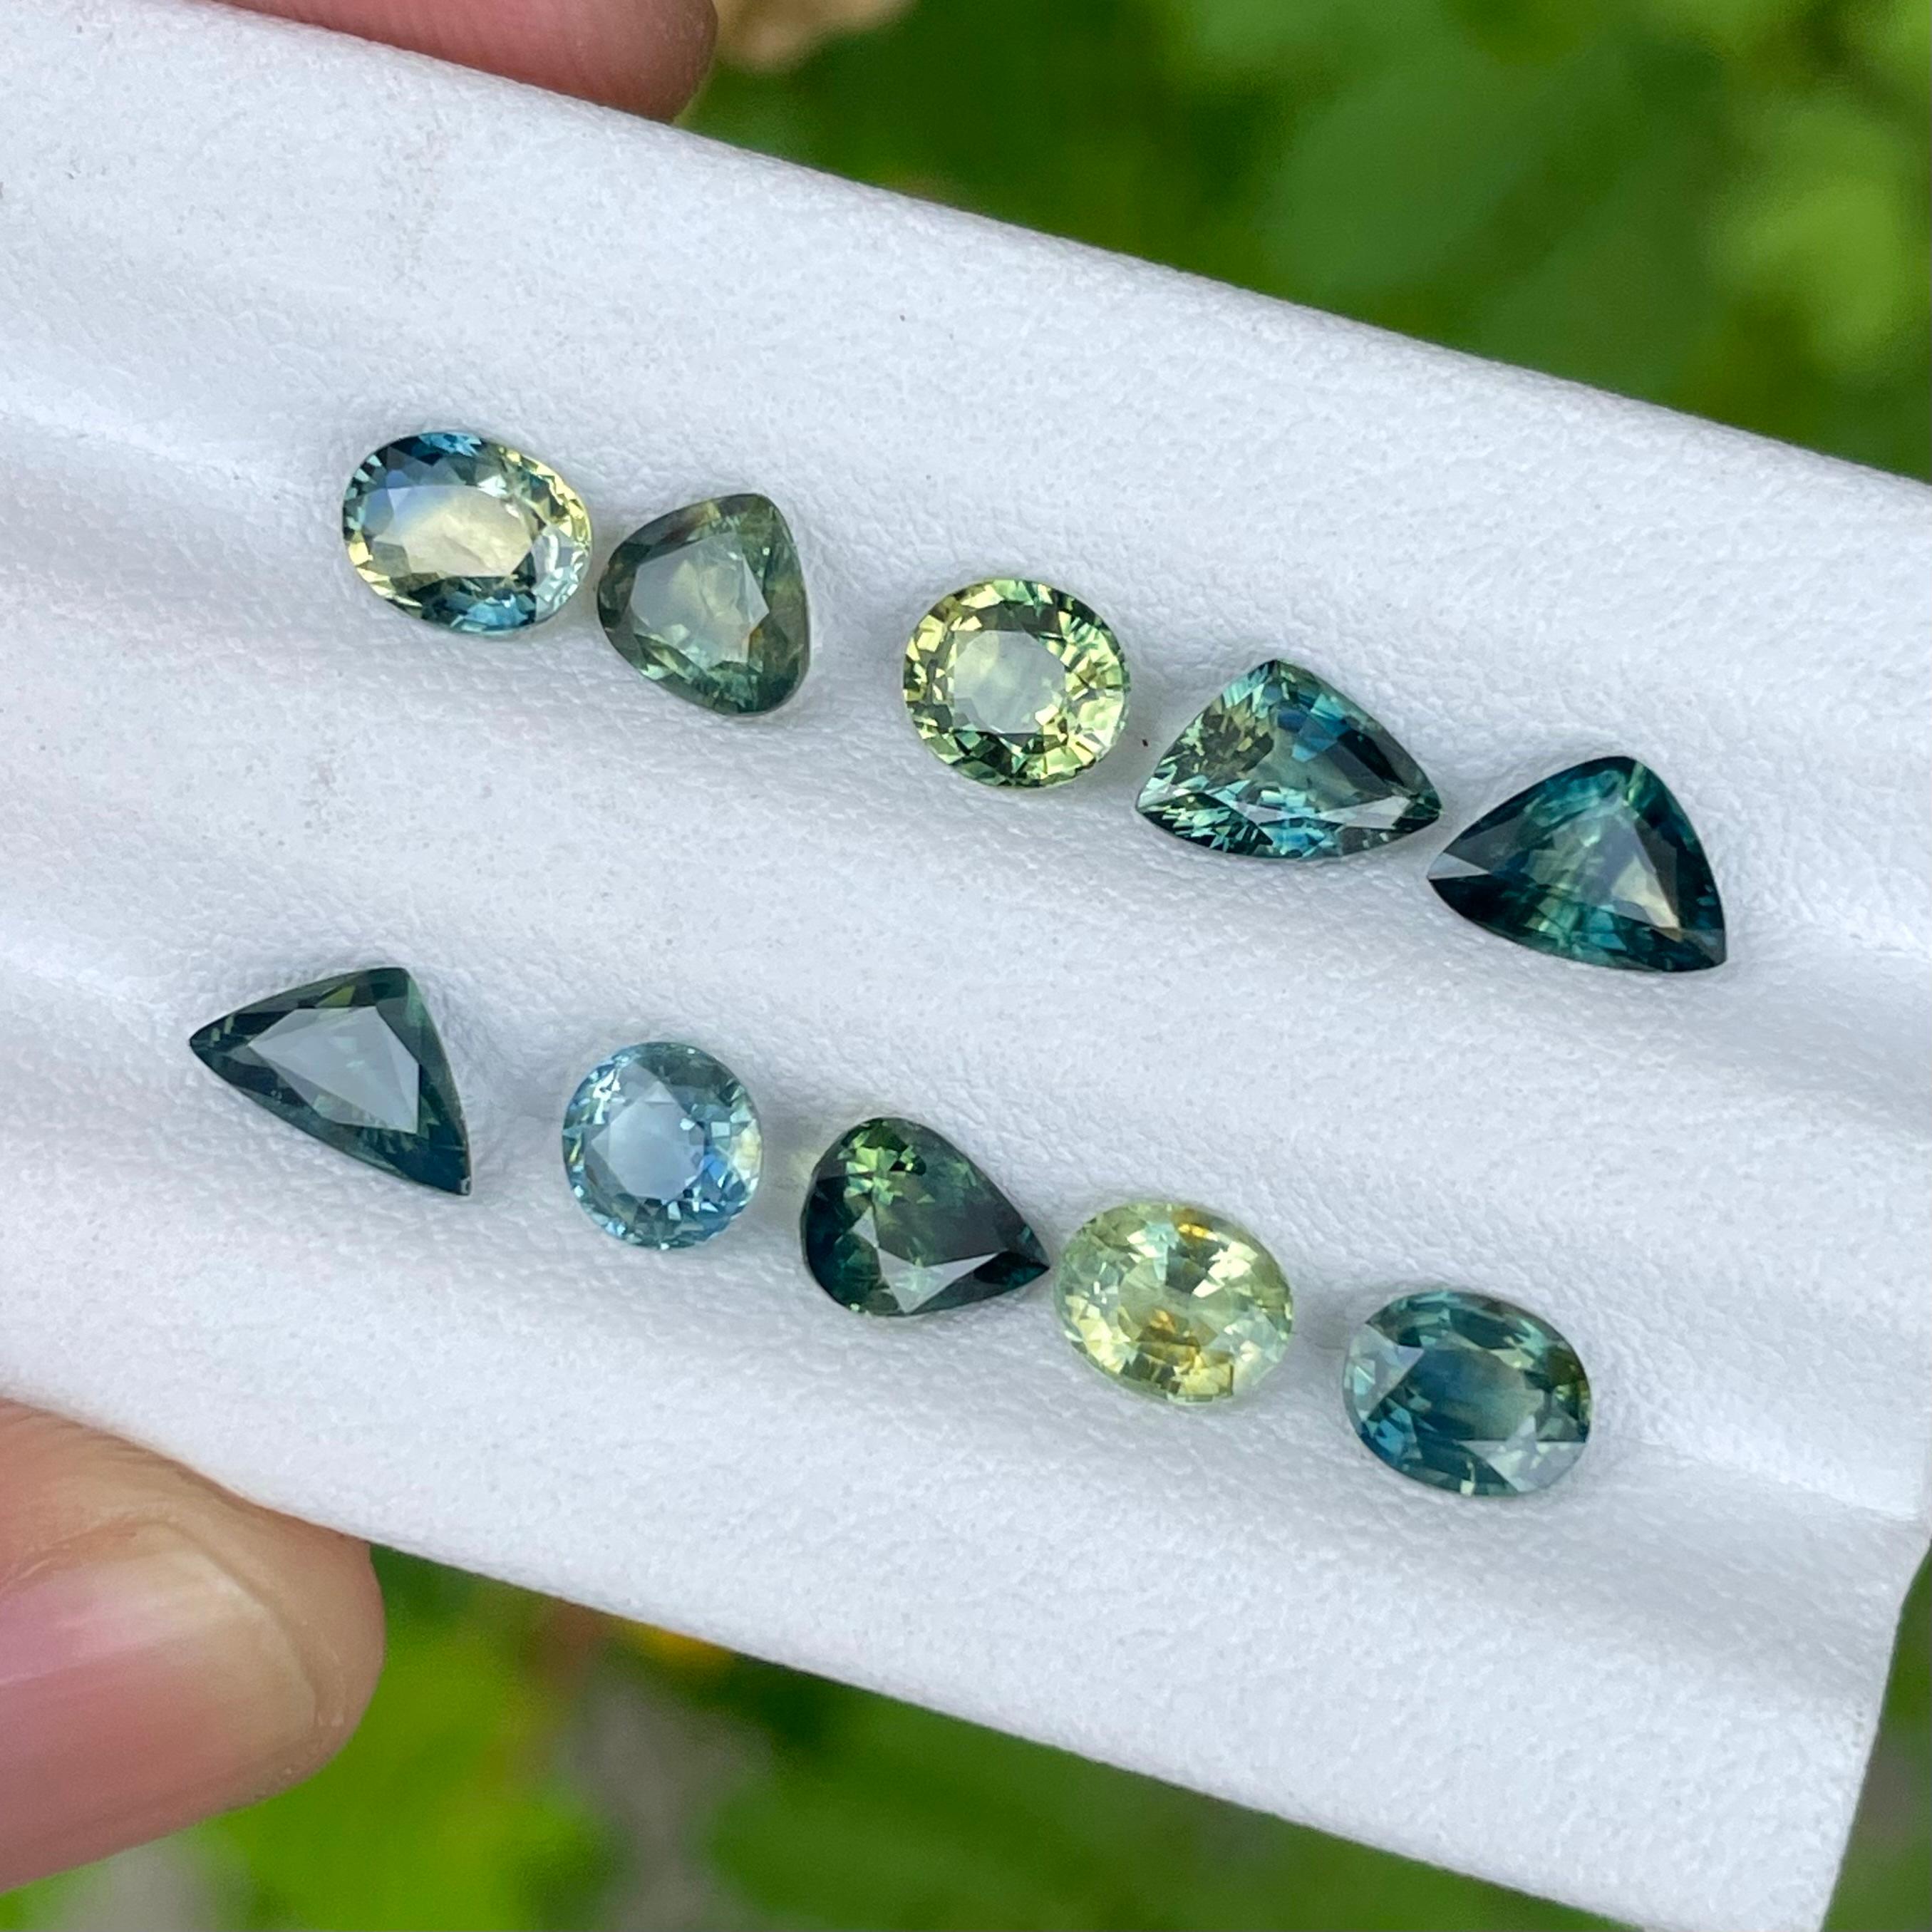 Modern Natural Parti Sapphire 6.90 carats 10 Pieces Gemstones Lot from Madagascar